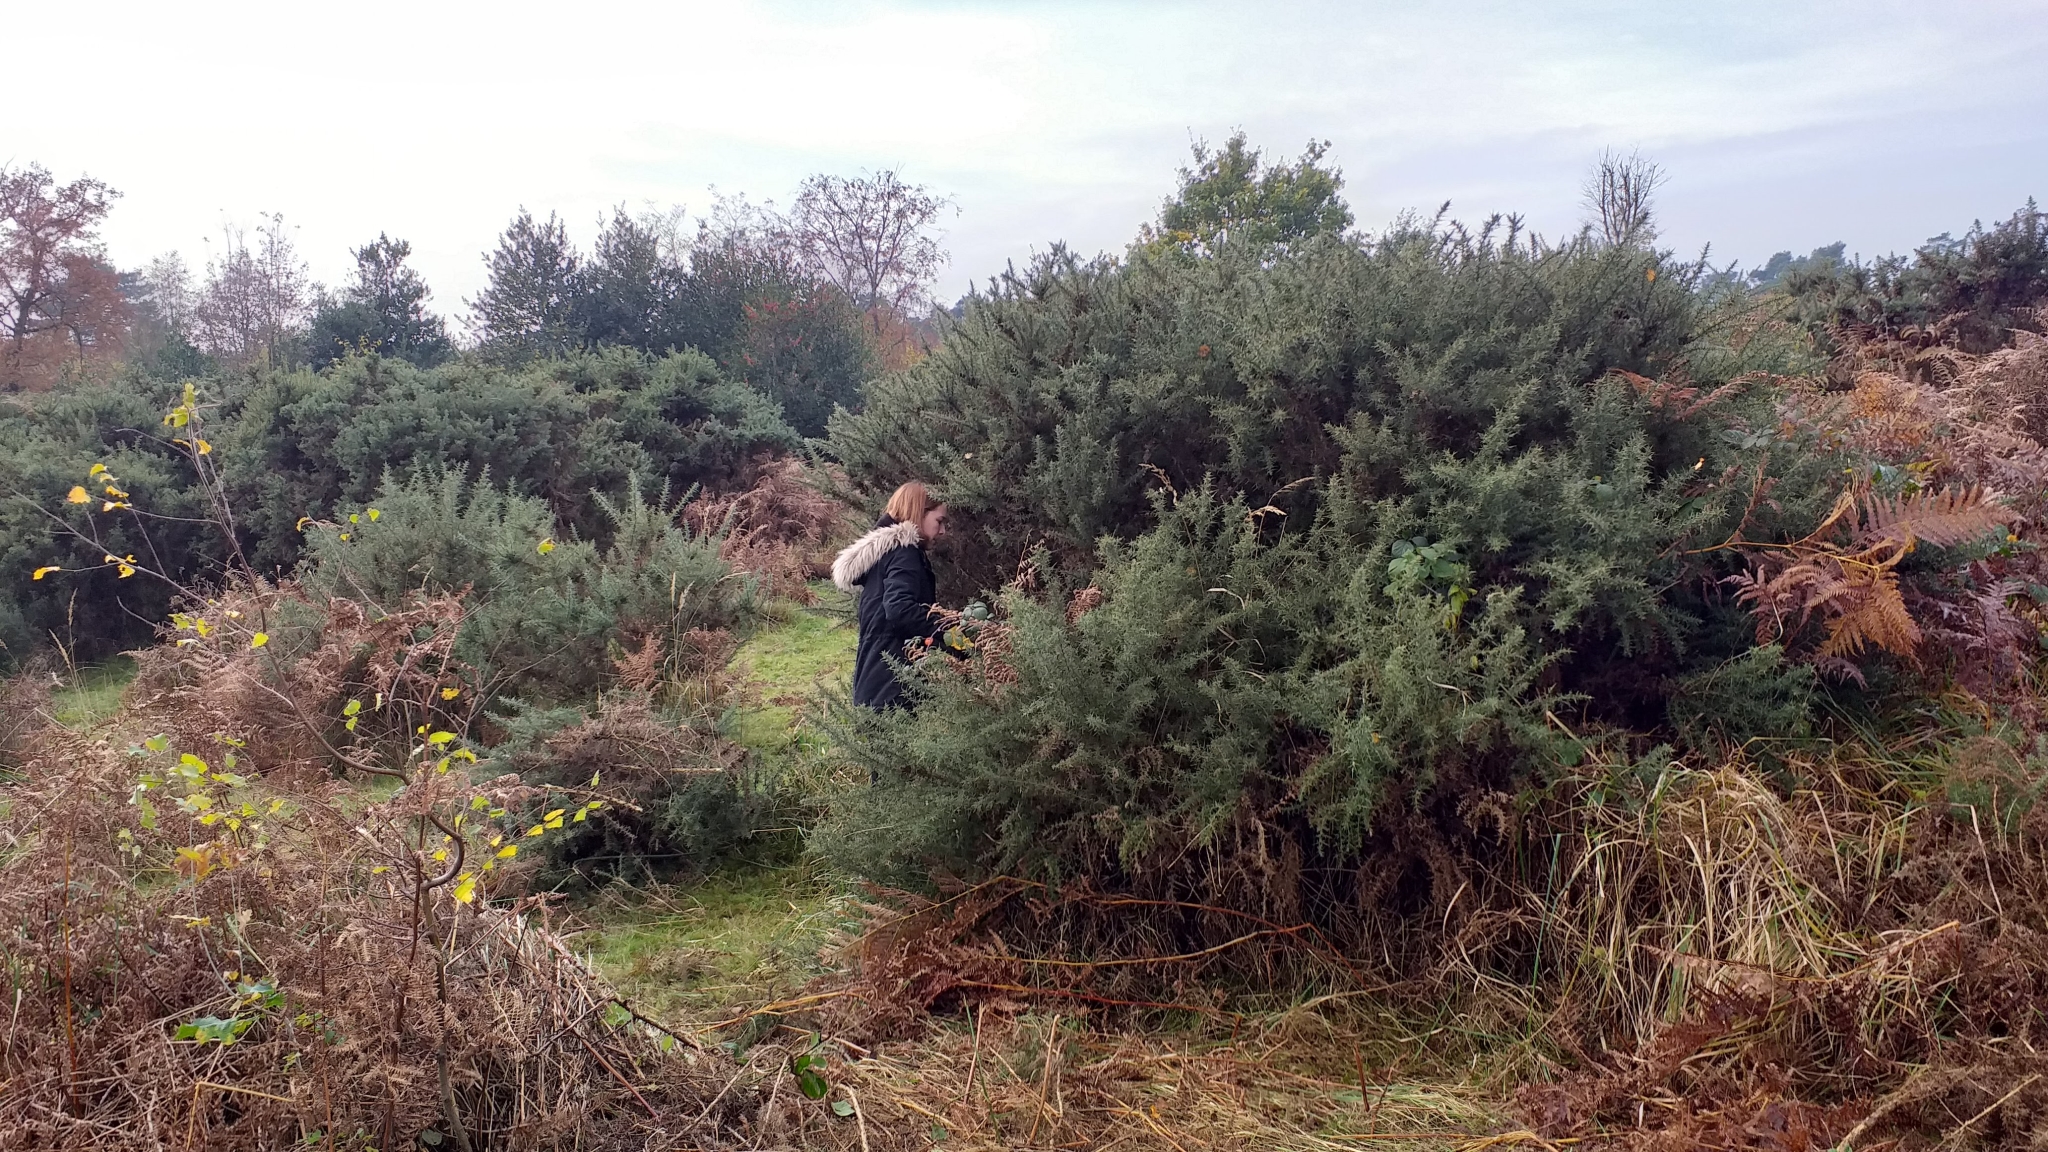 A photo from the FoTF Conservation Event - November 2019 - Gorse Clearance at Hockham Hills & Holes : A volunteer tackles a Gorse bush